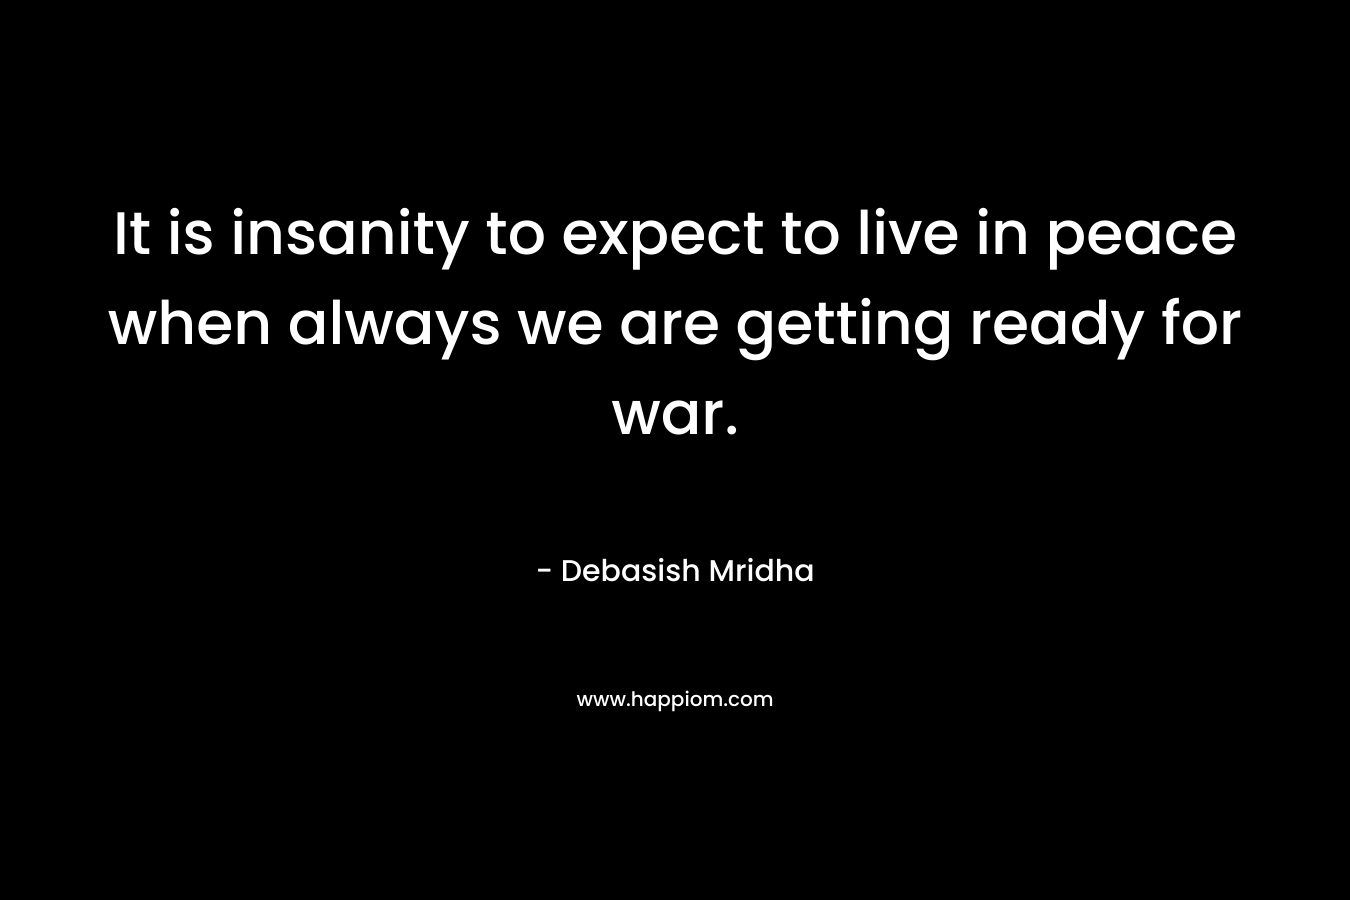 It is insanity to expect to live in peace when always we are getting ready for war.